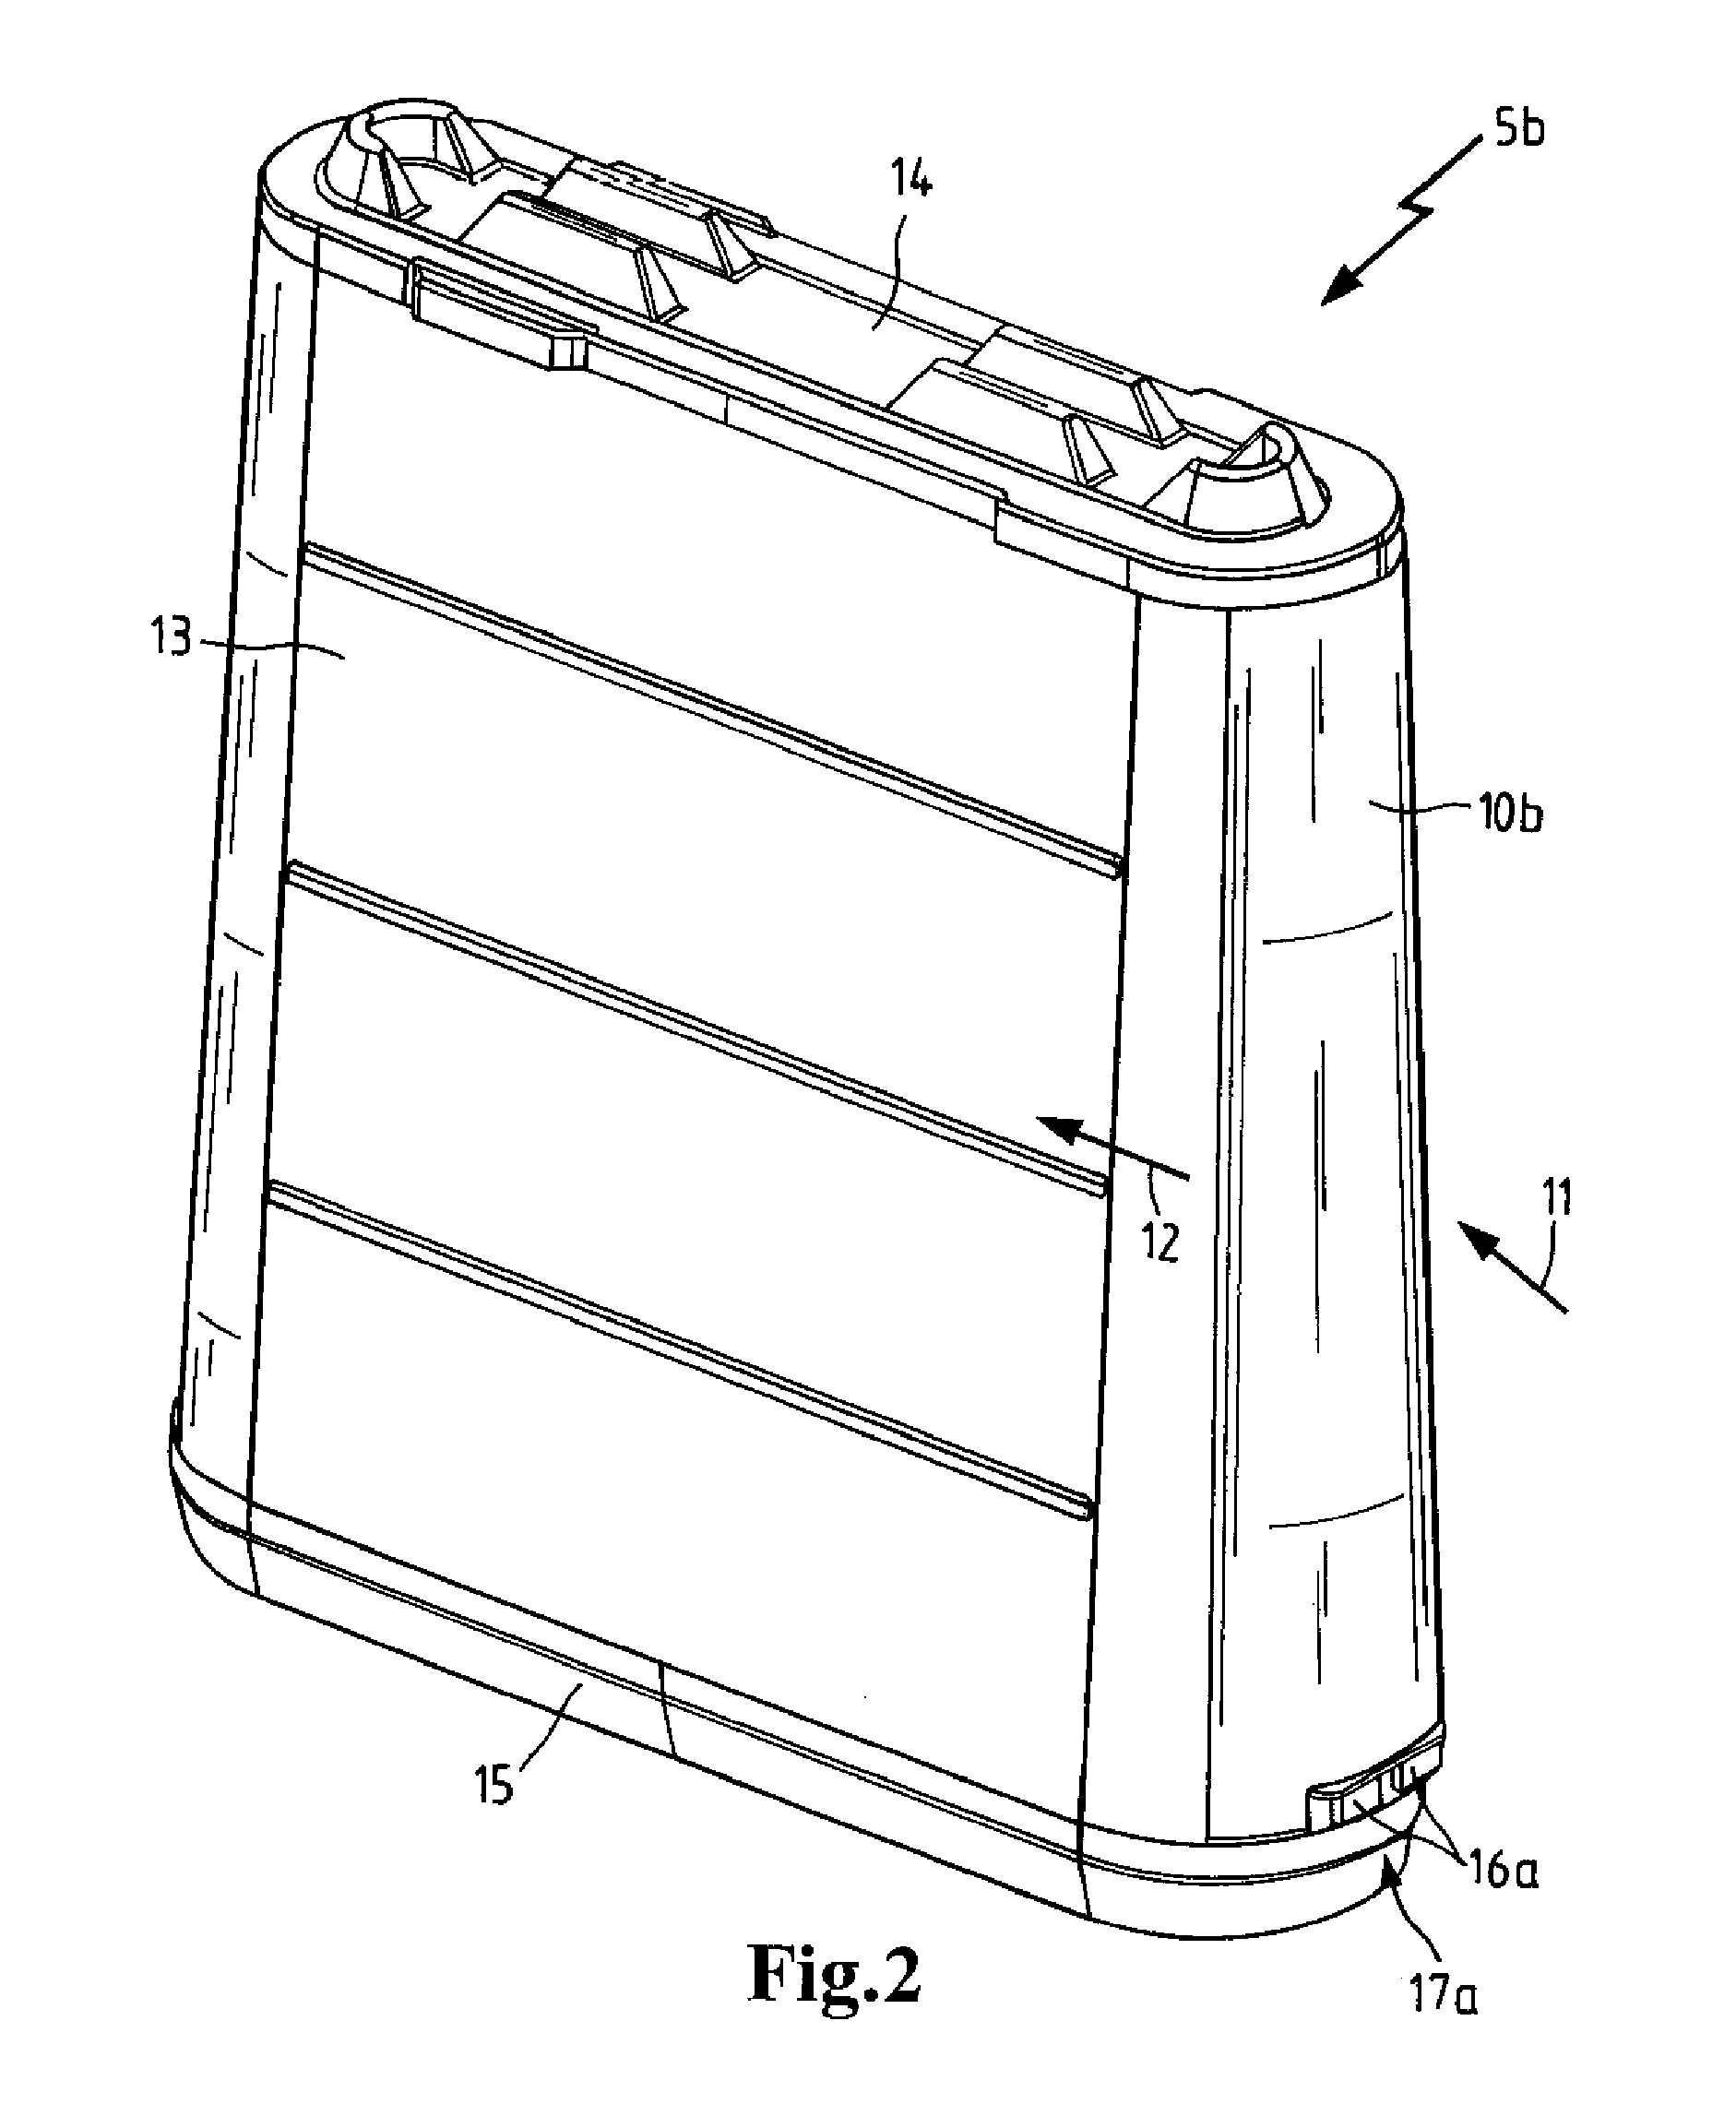 Filter element for an air inlet system